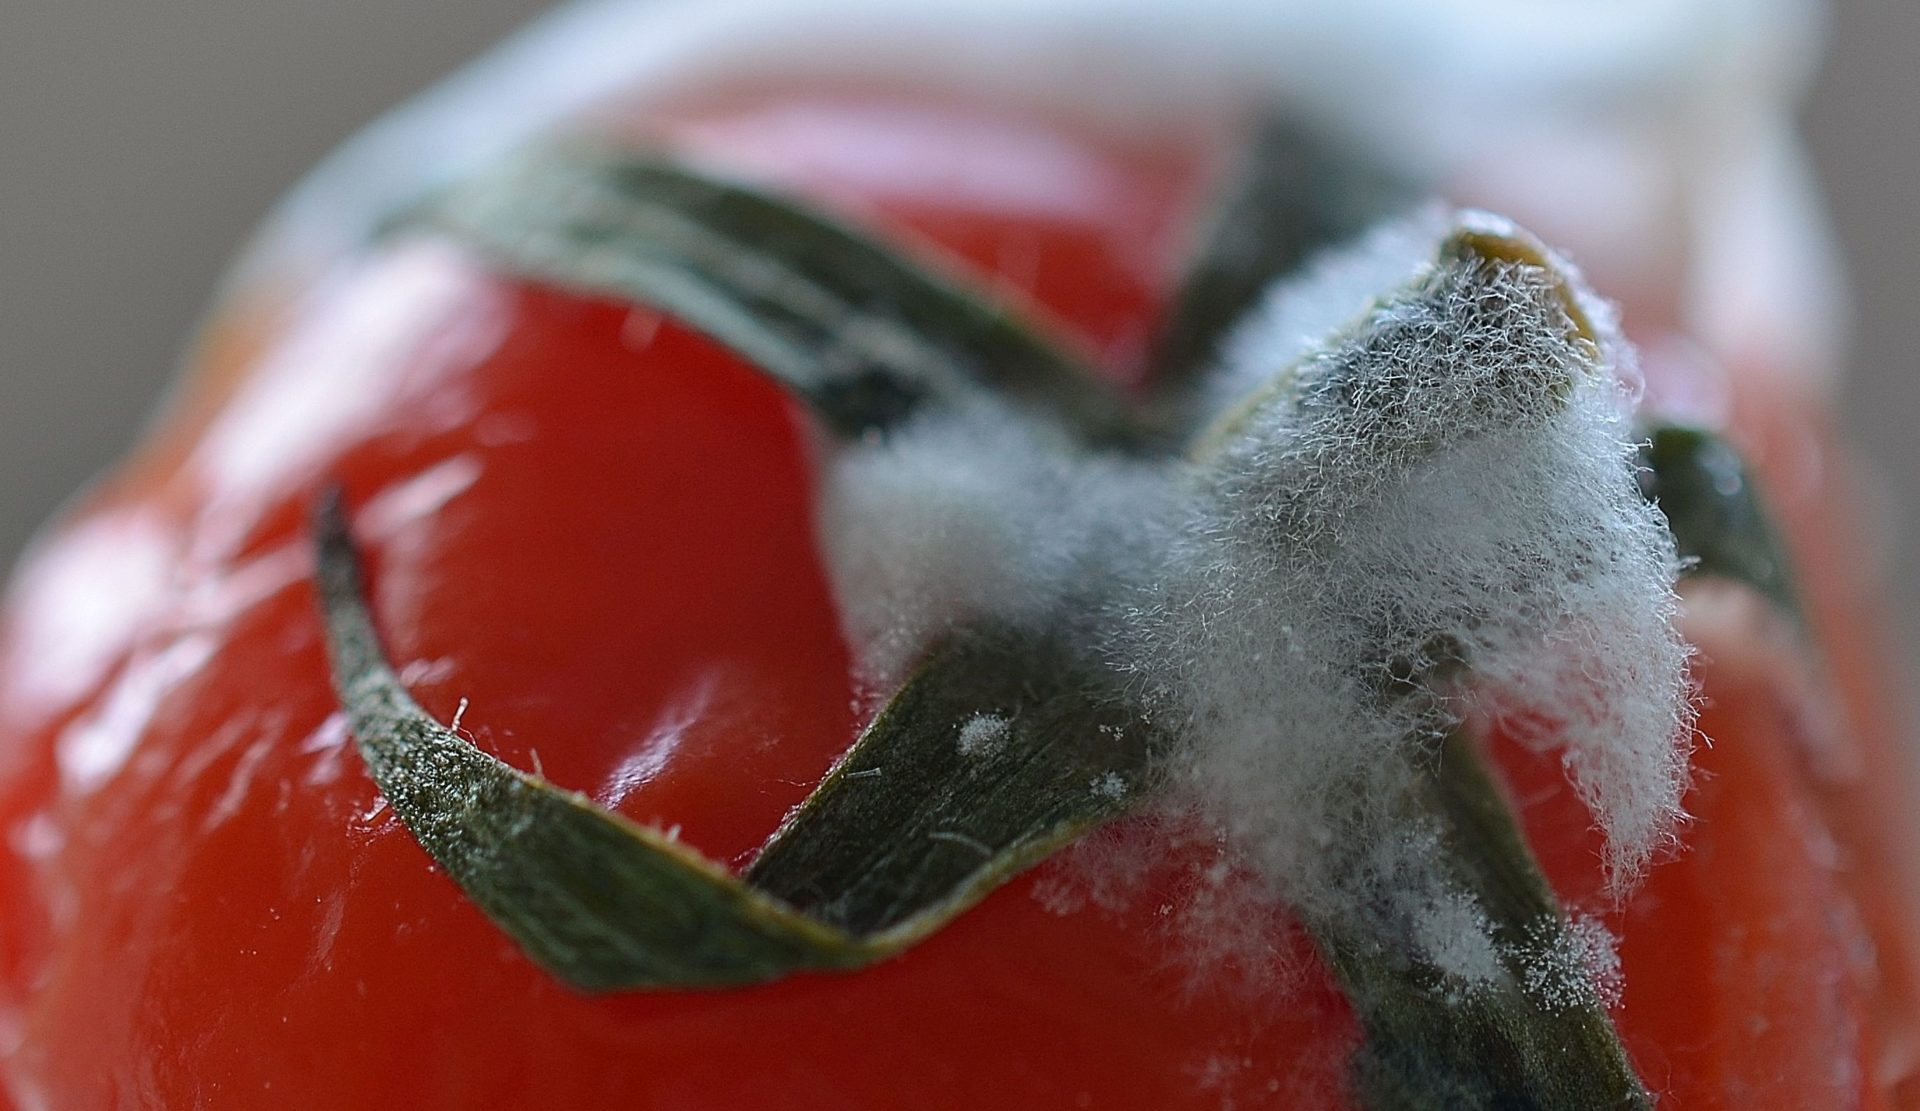 close-up-of-mould-on-tomato-stalk